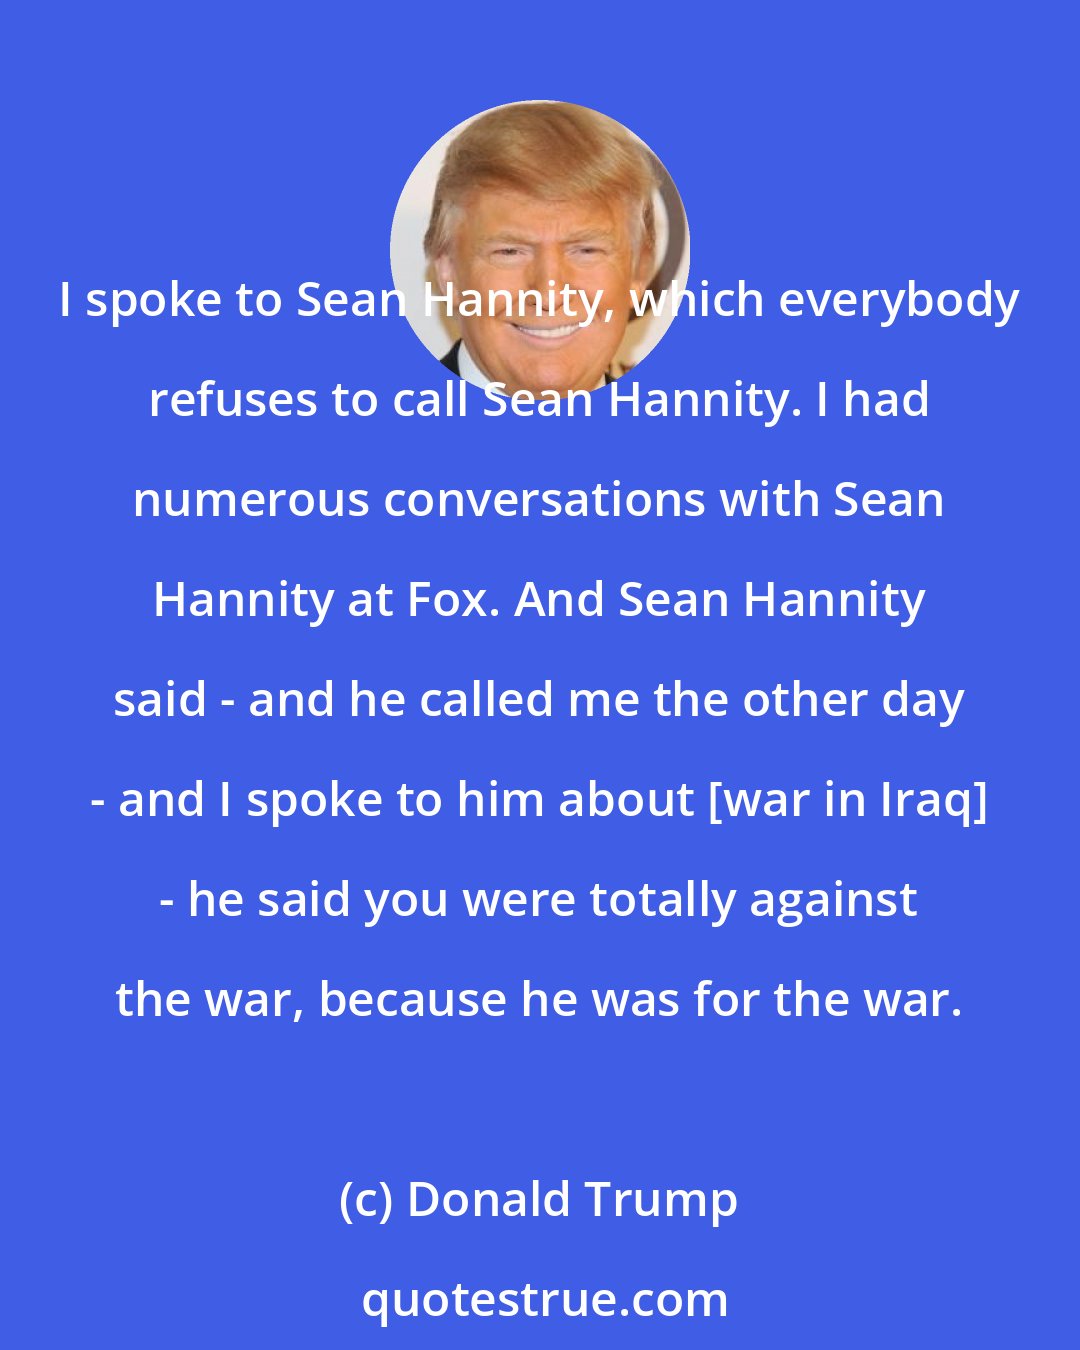 Donald Trump: I spoke to Sean Hannity, which everybody refuses to call Sean Hannity. I had numerous conversations with Sean Hannity at Fox. And Sean Hannity said - and he called me the other day - and I spoke to him about [war in Iraq] - he said you were totally against the war, because he was for the war.